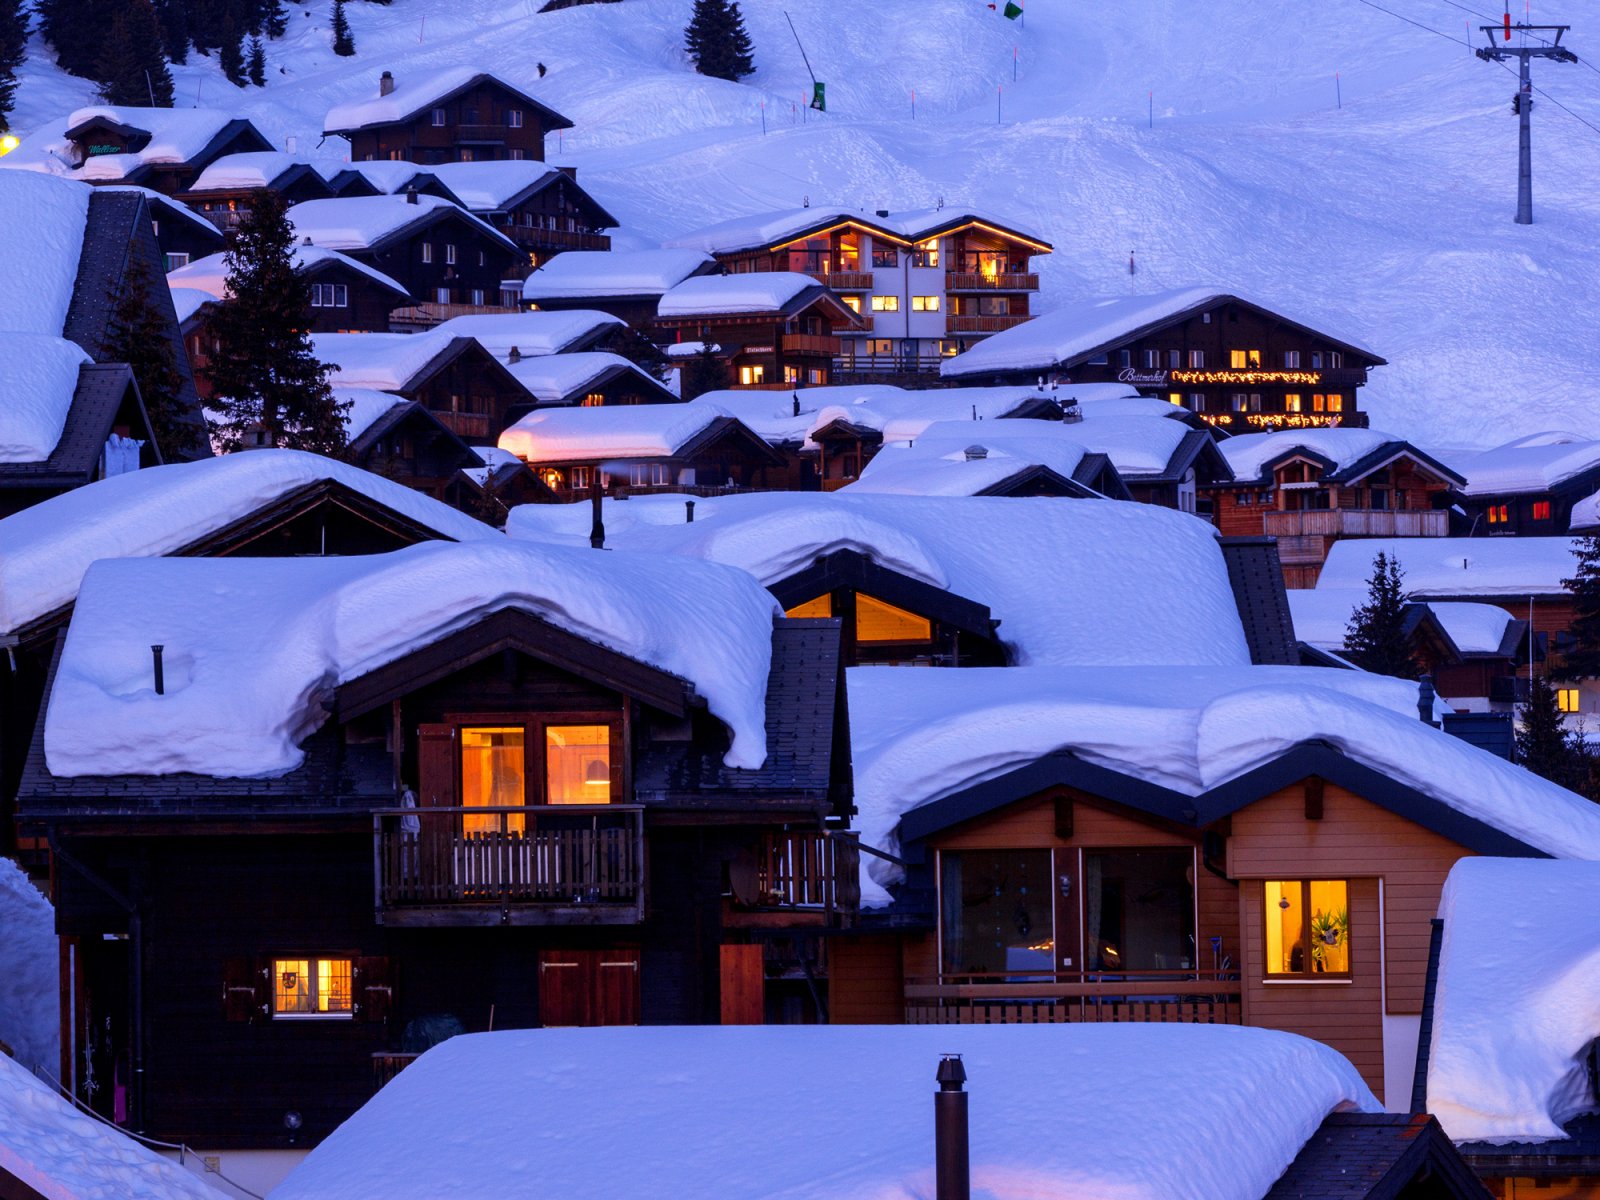 Christmas in Switzerland - Swiss Chalets at Dusk